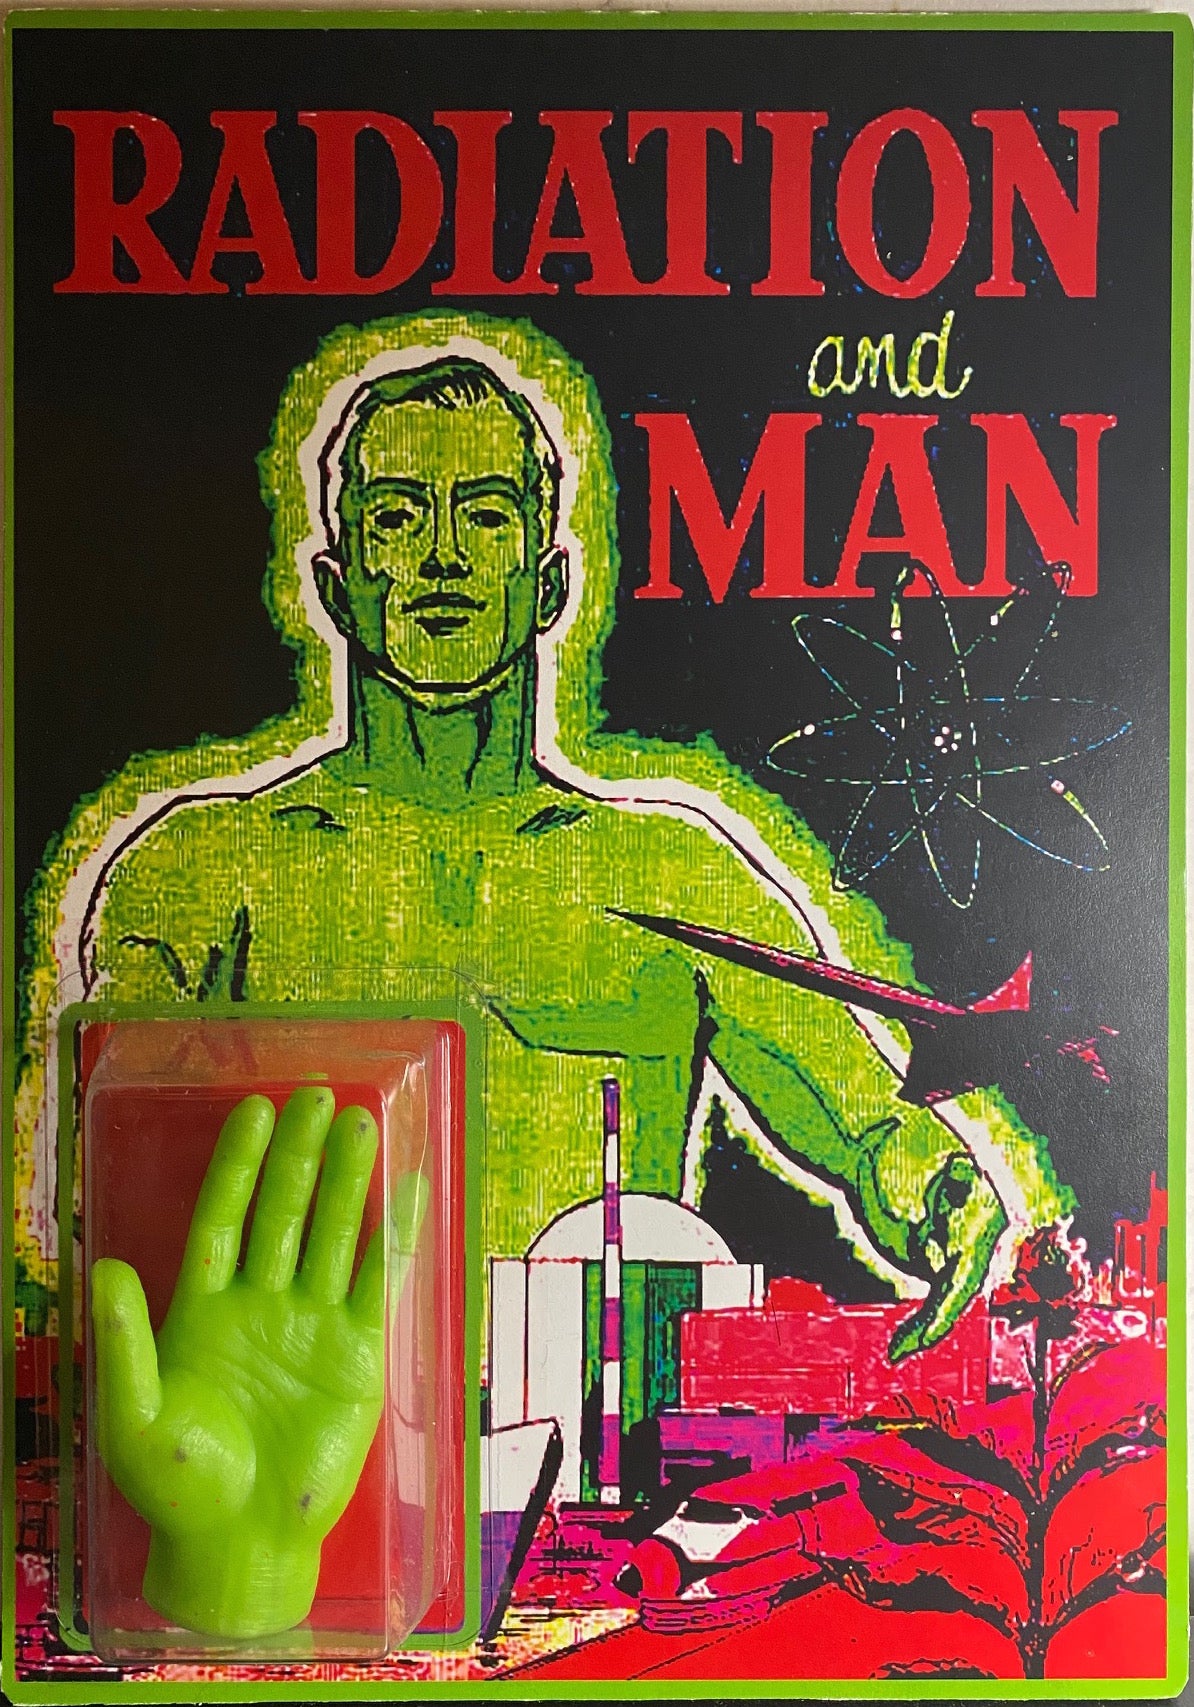 THE SUCKLORD, “Radiation and Man”